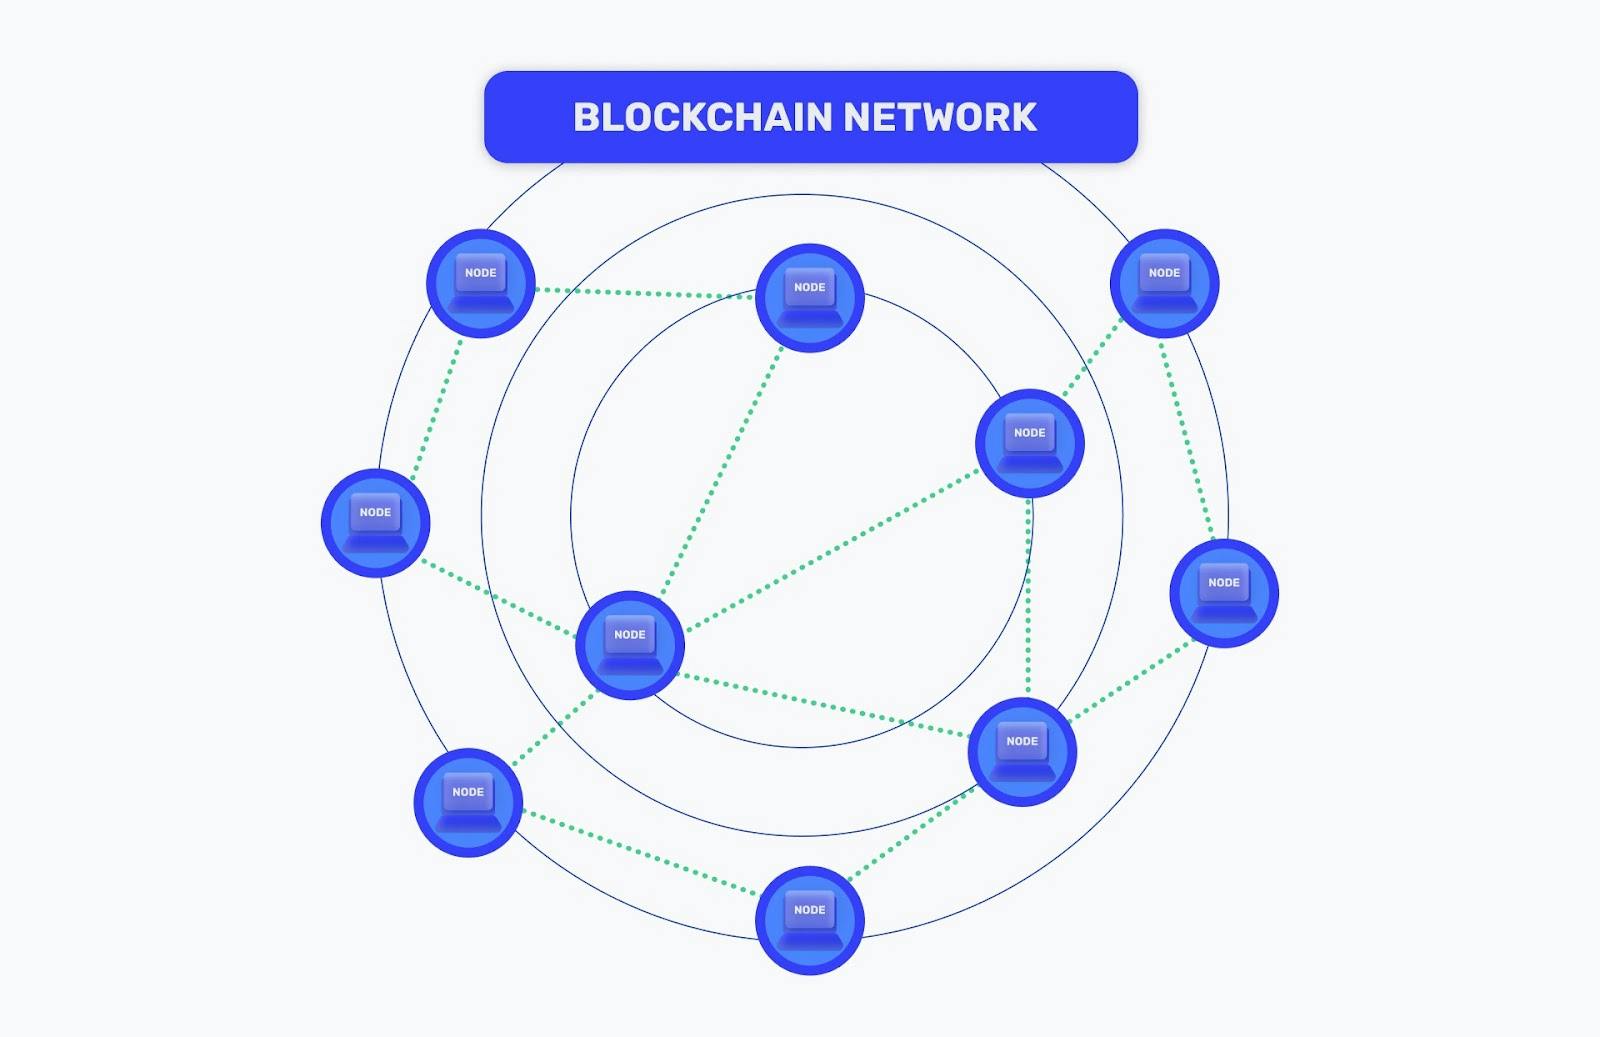 A diagram showing how peer-to-peer nodes connect and interact on a blockchain network.